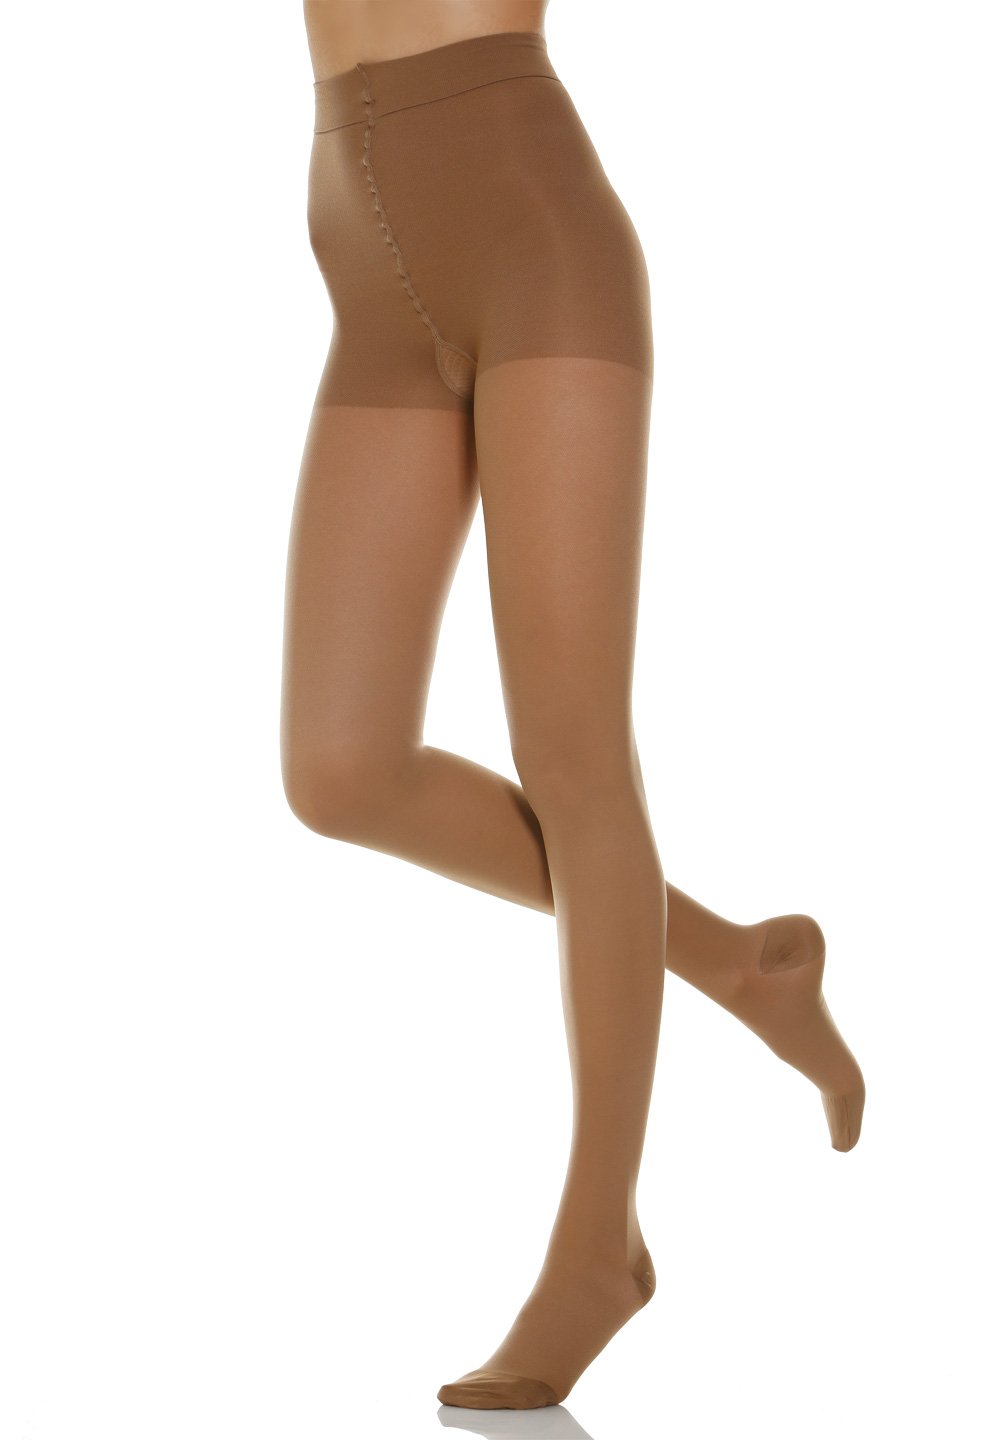 Support Tights Compression Stockings 140DEN 18-22 Mmhg